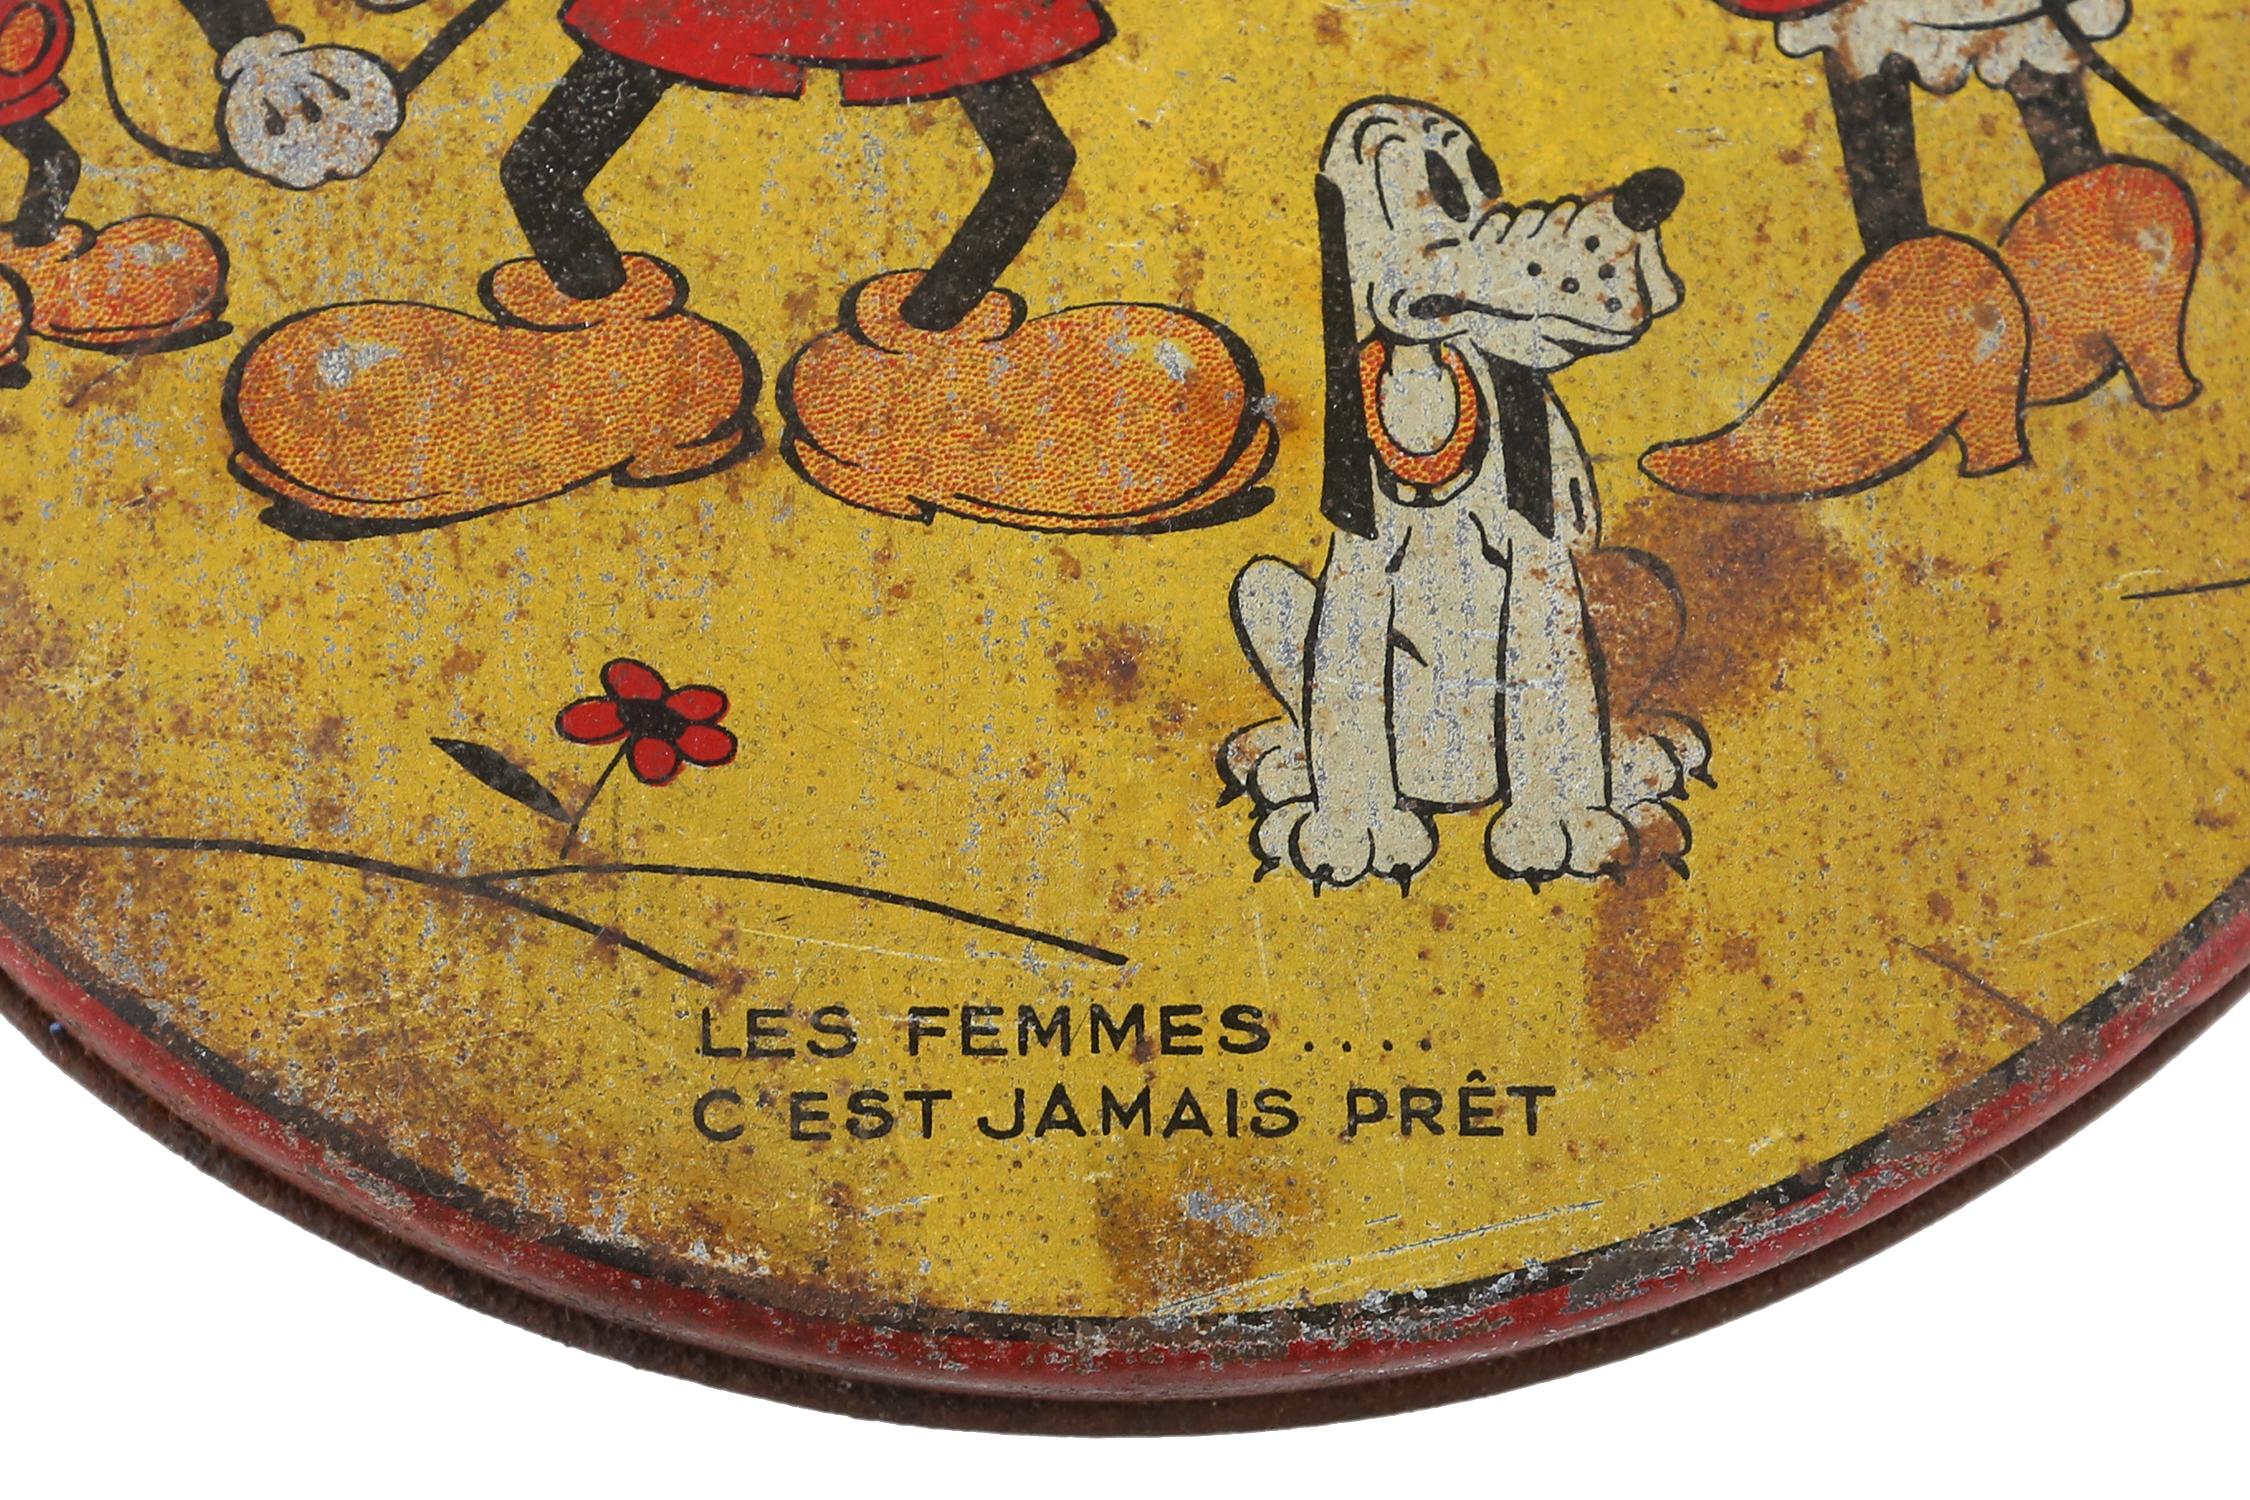 1930s Walt Disney Tin with Mickey Mouse, Minnie Mouse, Pluto and Cat.
This Lithographic yellow round tin has beautiful images with the famous Walt Disney Animation Characters.